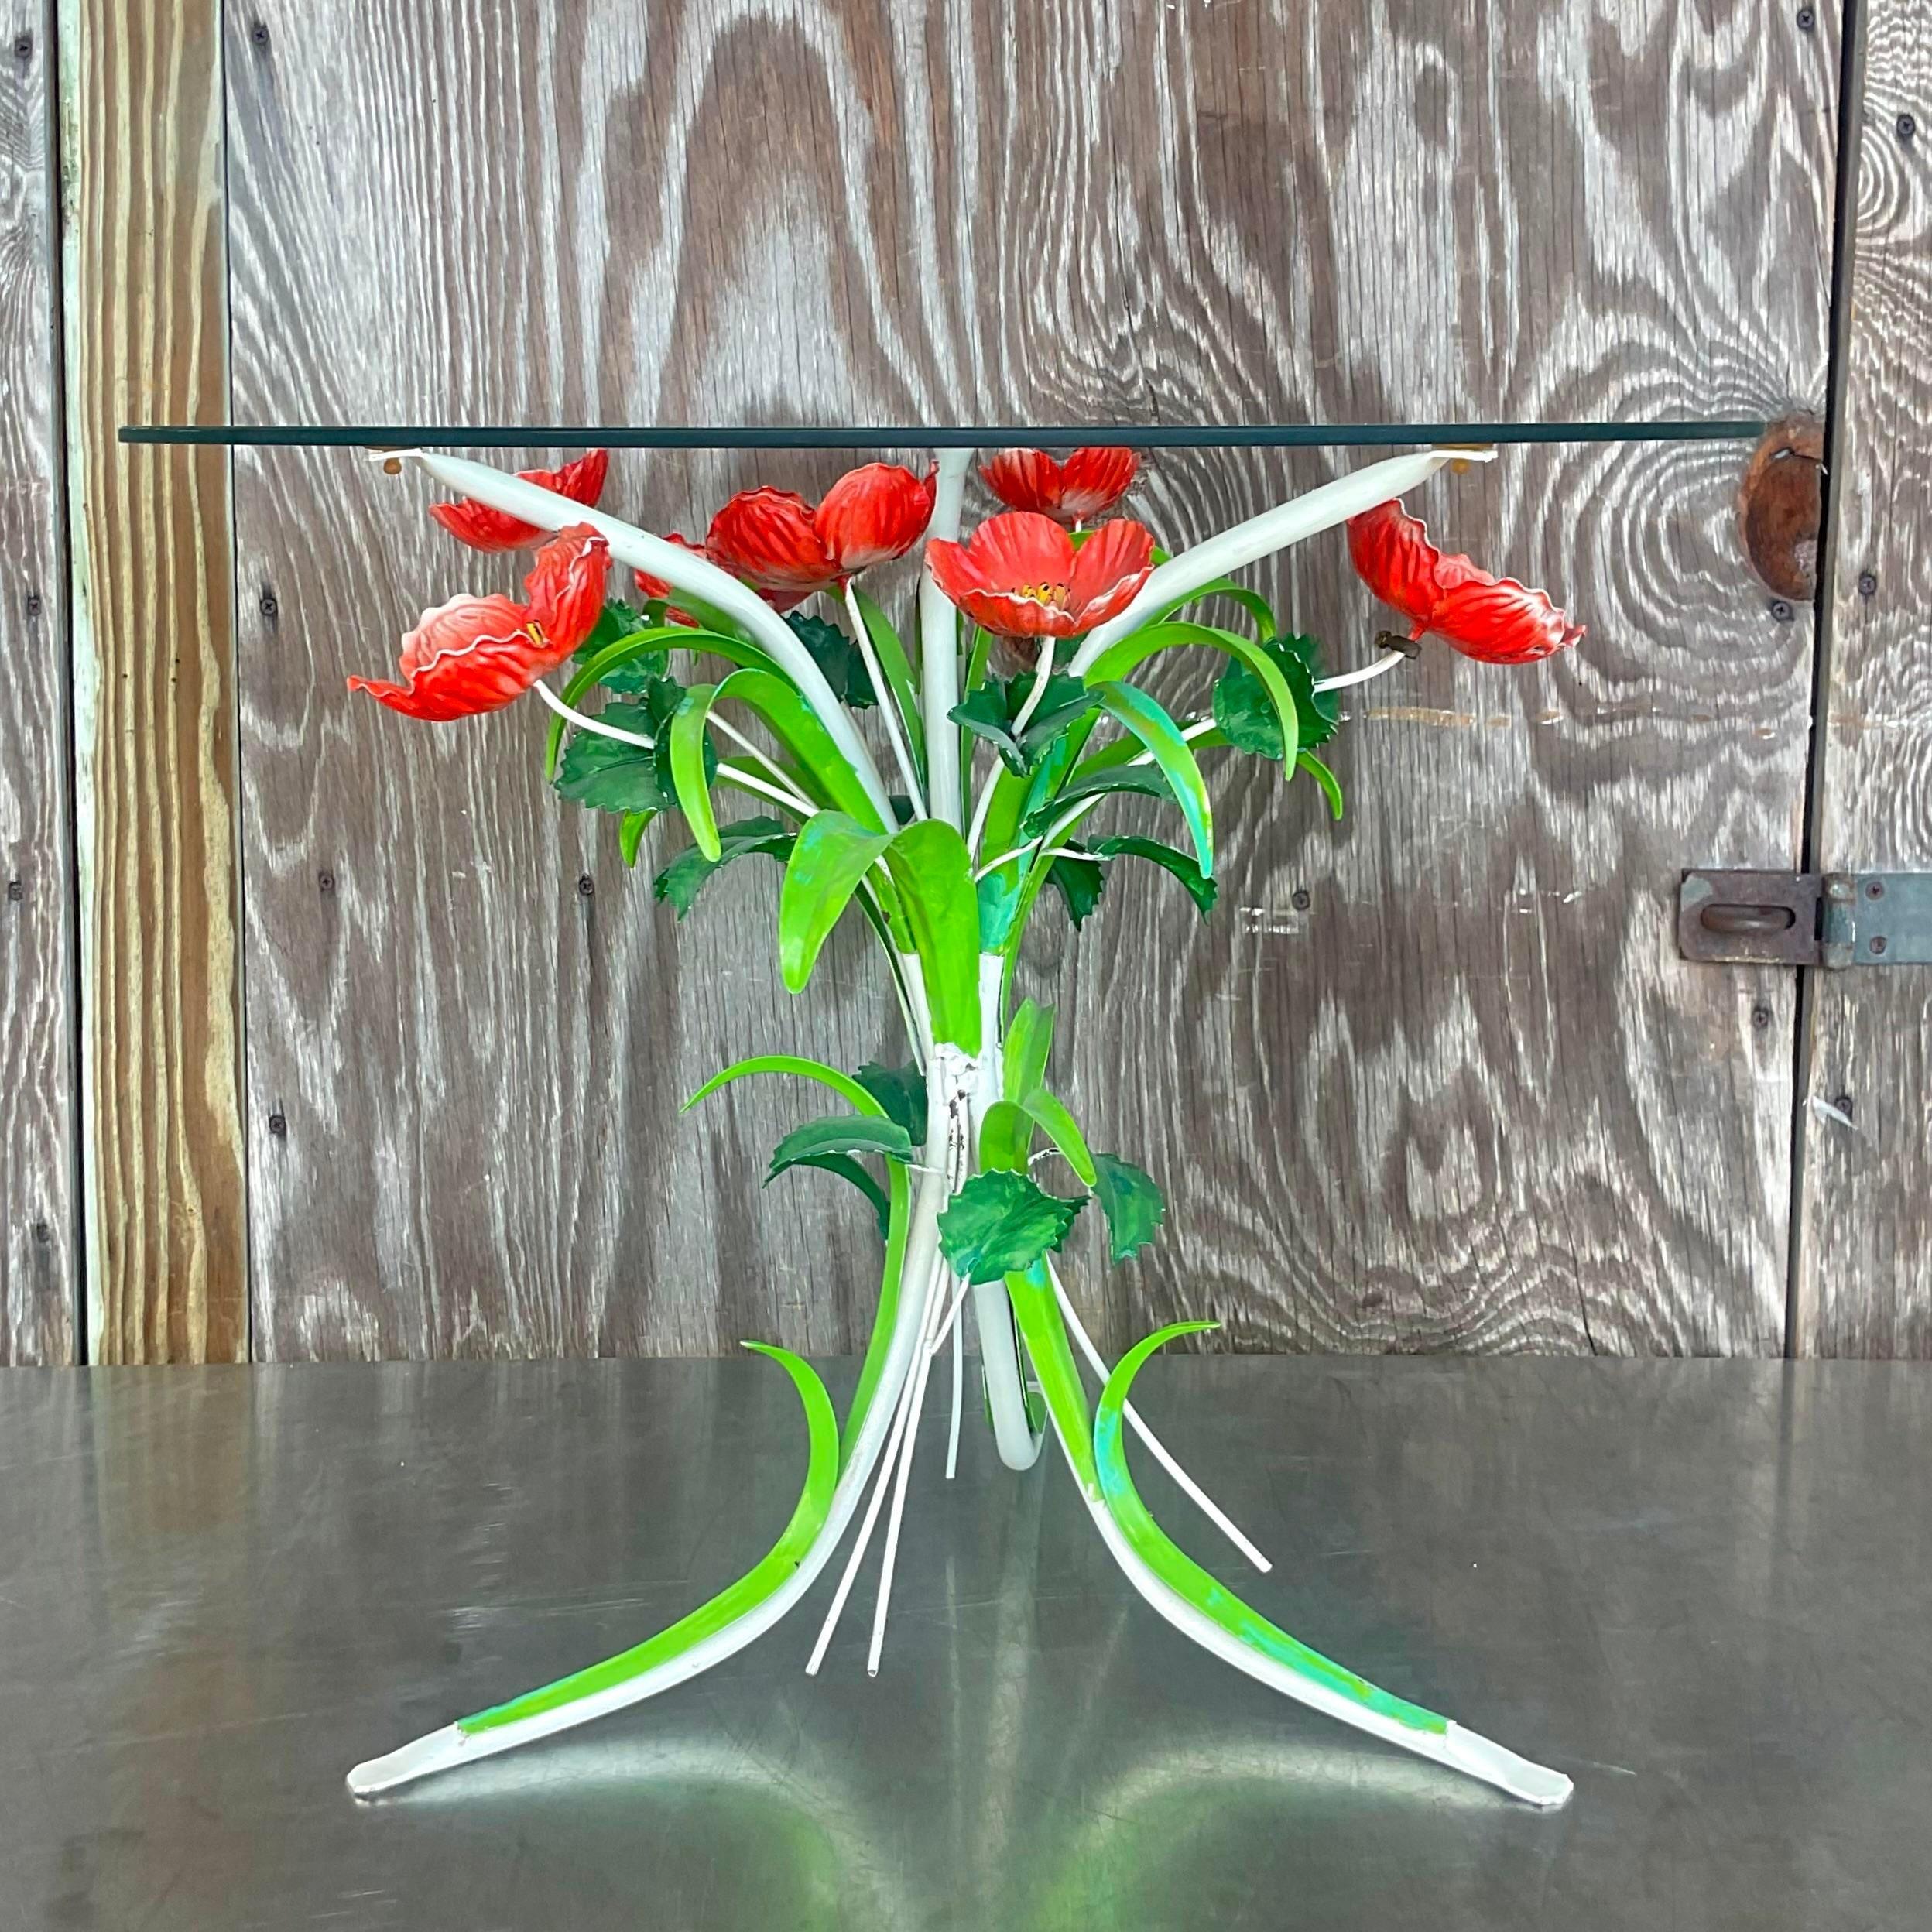 A vintage Boho Italian side table. A chic hand painted bouquet of bright red poppies. 24 inch round glass top rests on the surface. A cheerful addition to any space. Acquired from a Palm Beach estate